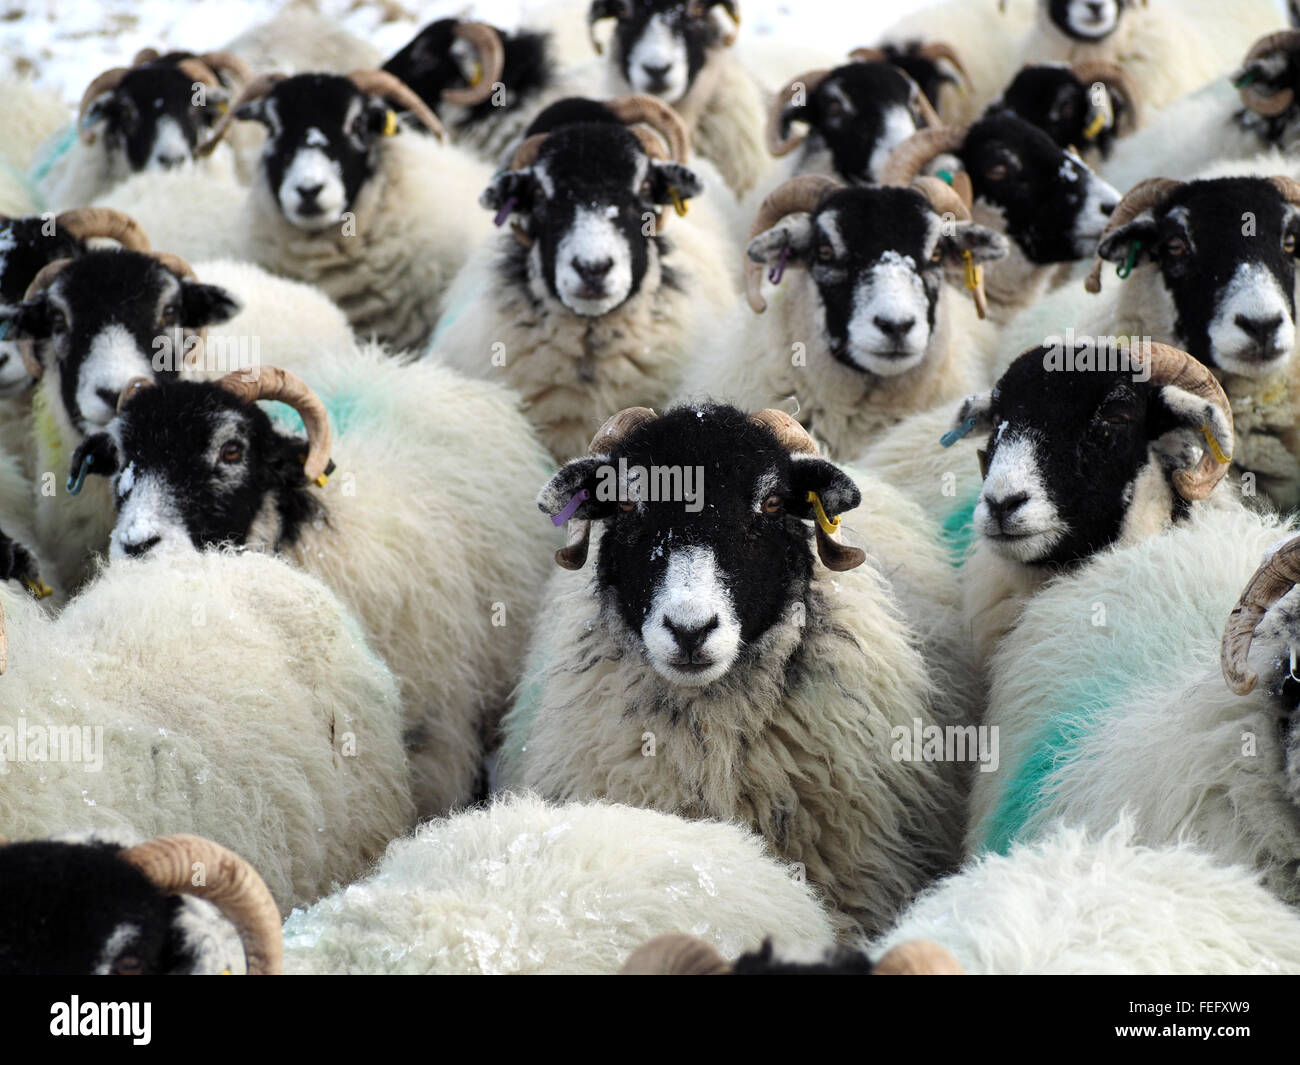 flock of black faced sheep waiting for feed crowd around in snowy winter conditions Stock Photo